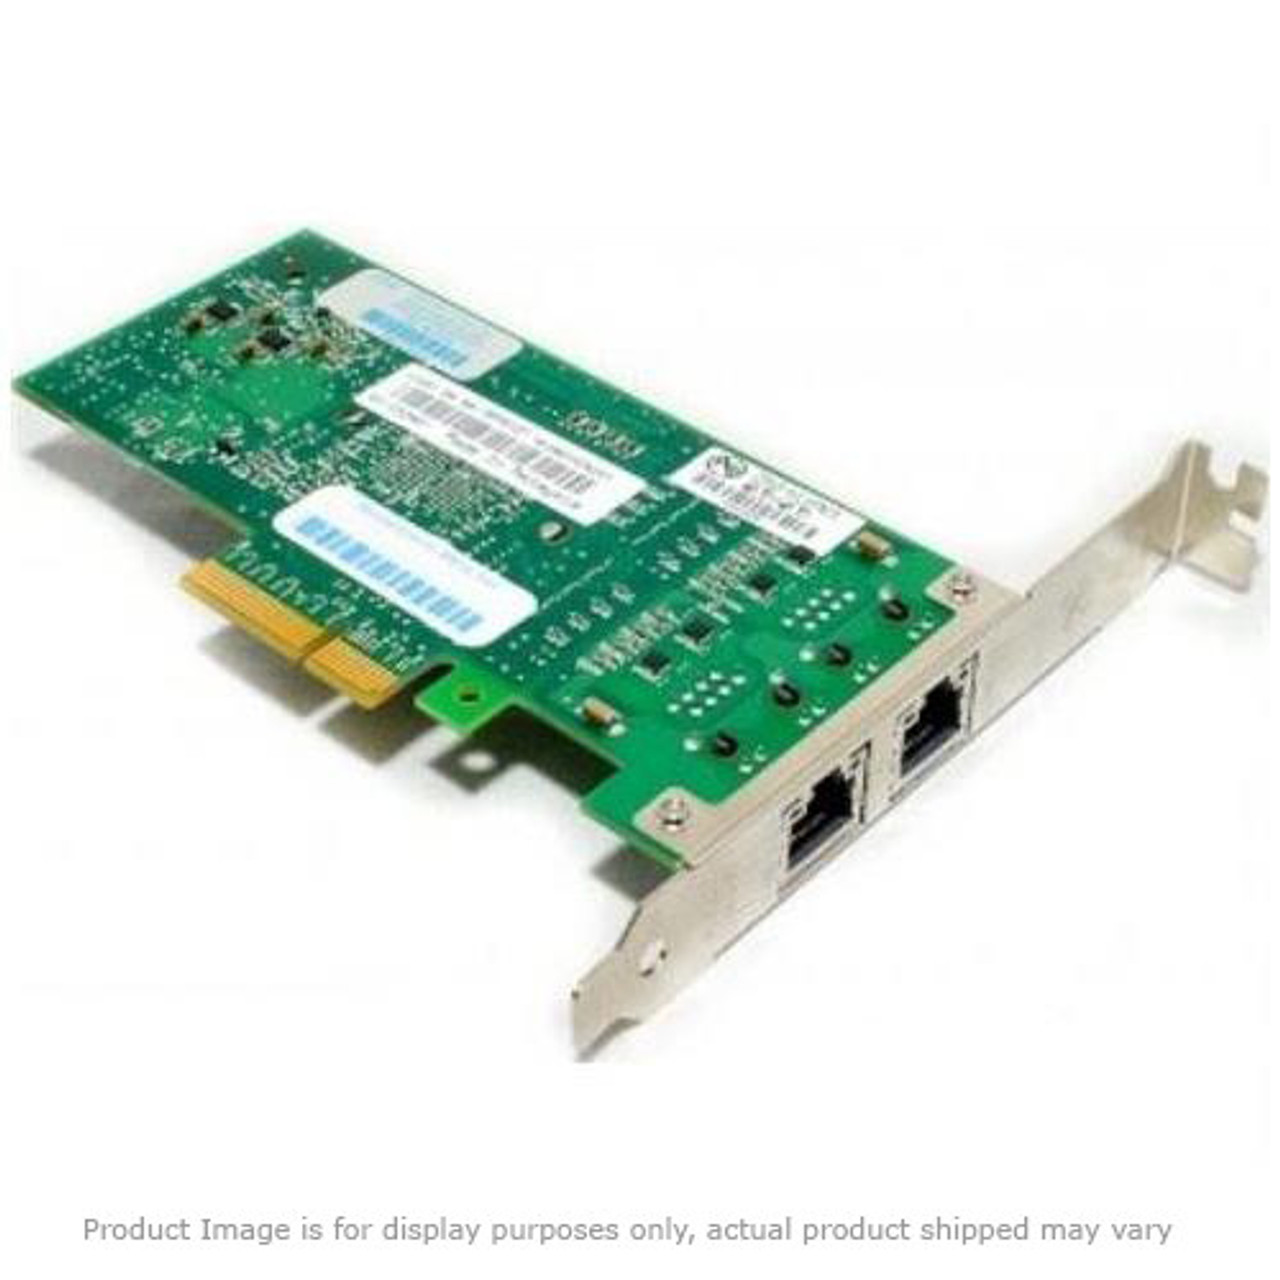 4402550 Marconi 155Mbps Physical Interface Card (PIC) NIC UTP Copper Port